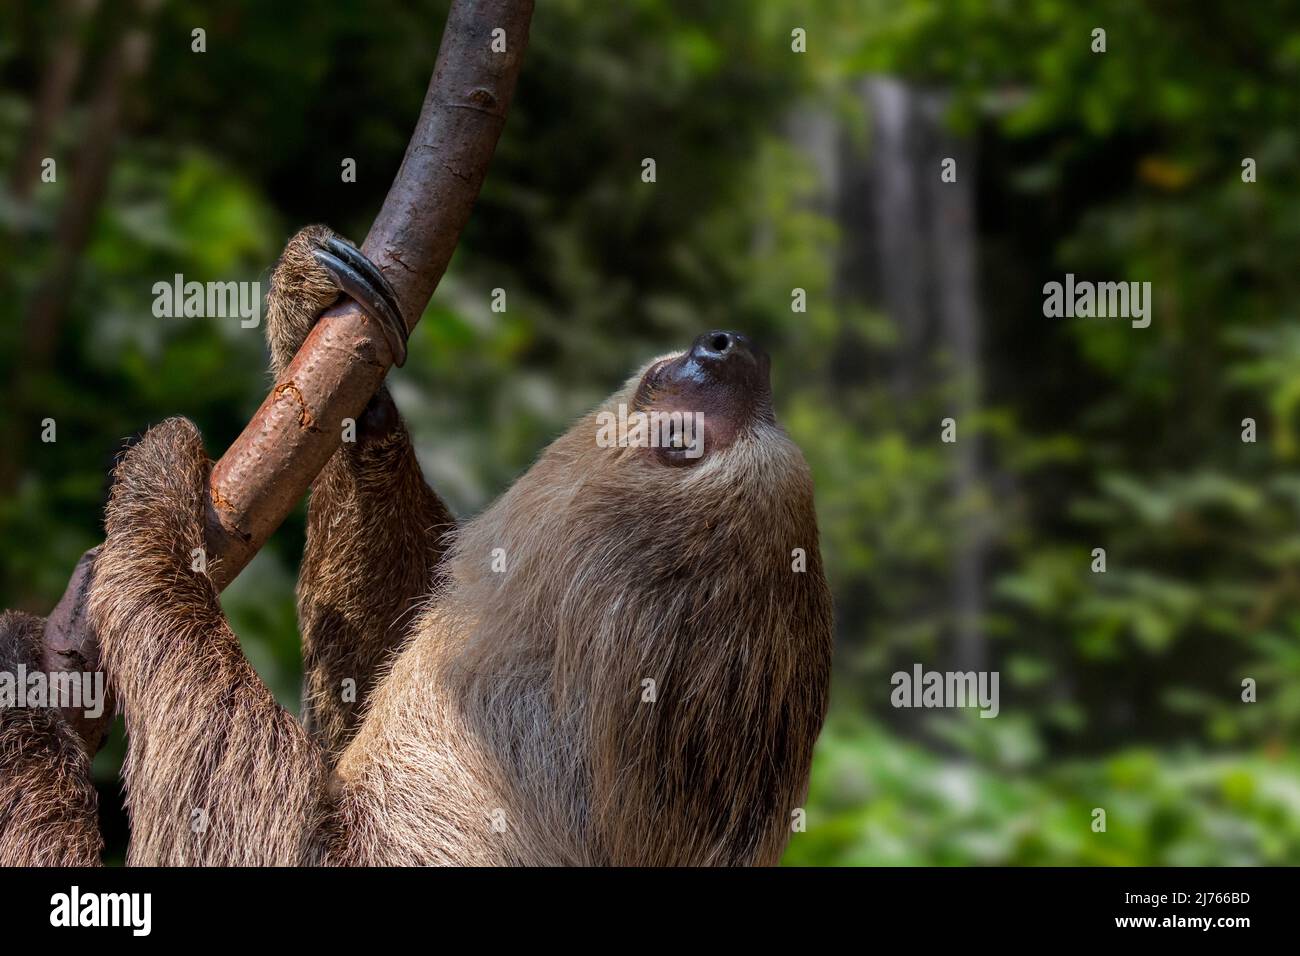 Linnaeus's two-toed sloth / southern two-toed sloth / Linne's two-toed sloth (Choloepus didactylus / Bradypus didactylus) climbing tree, South America Stock Photo